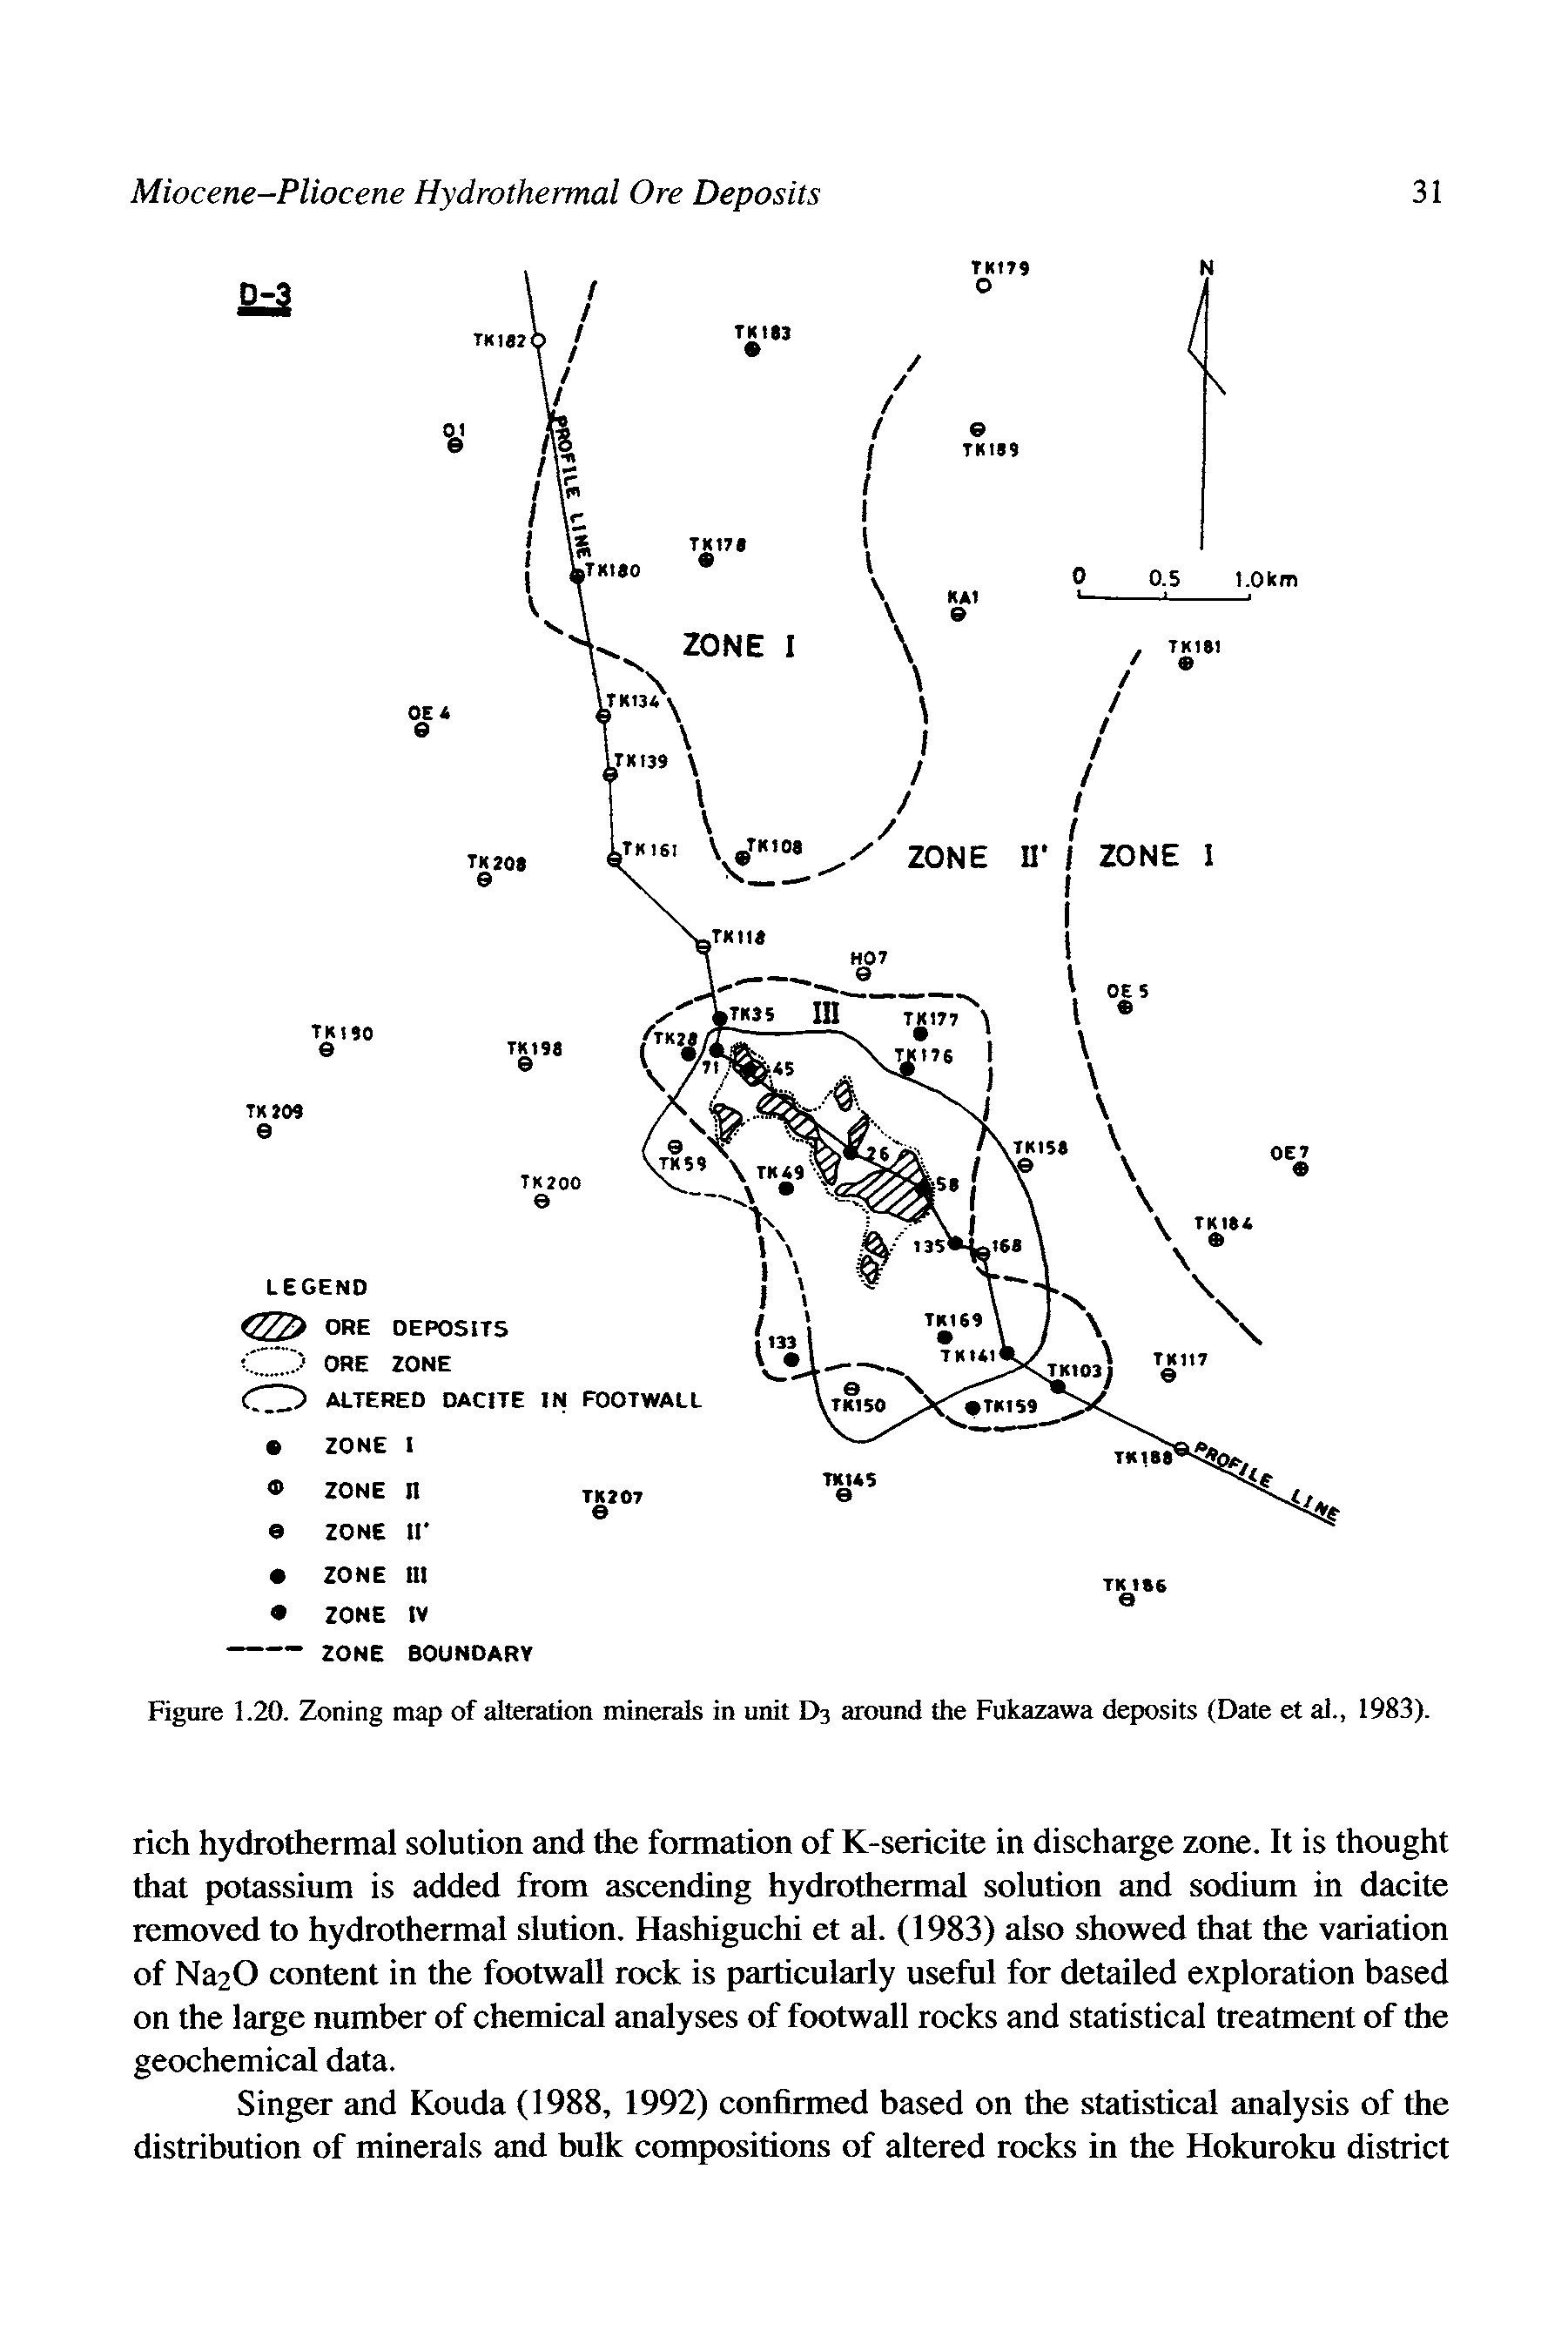 Figure 1.20. Zoning map of alteration minerals in unit D3 around the Fukazawa deposits (Date et al., 1983).